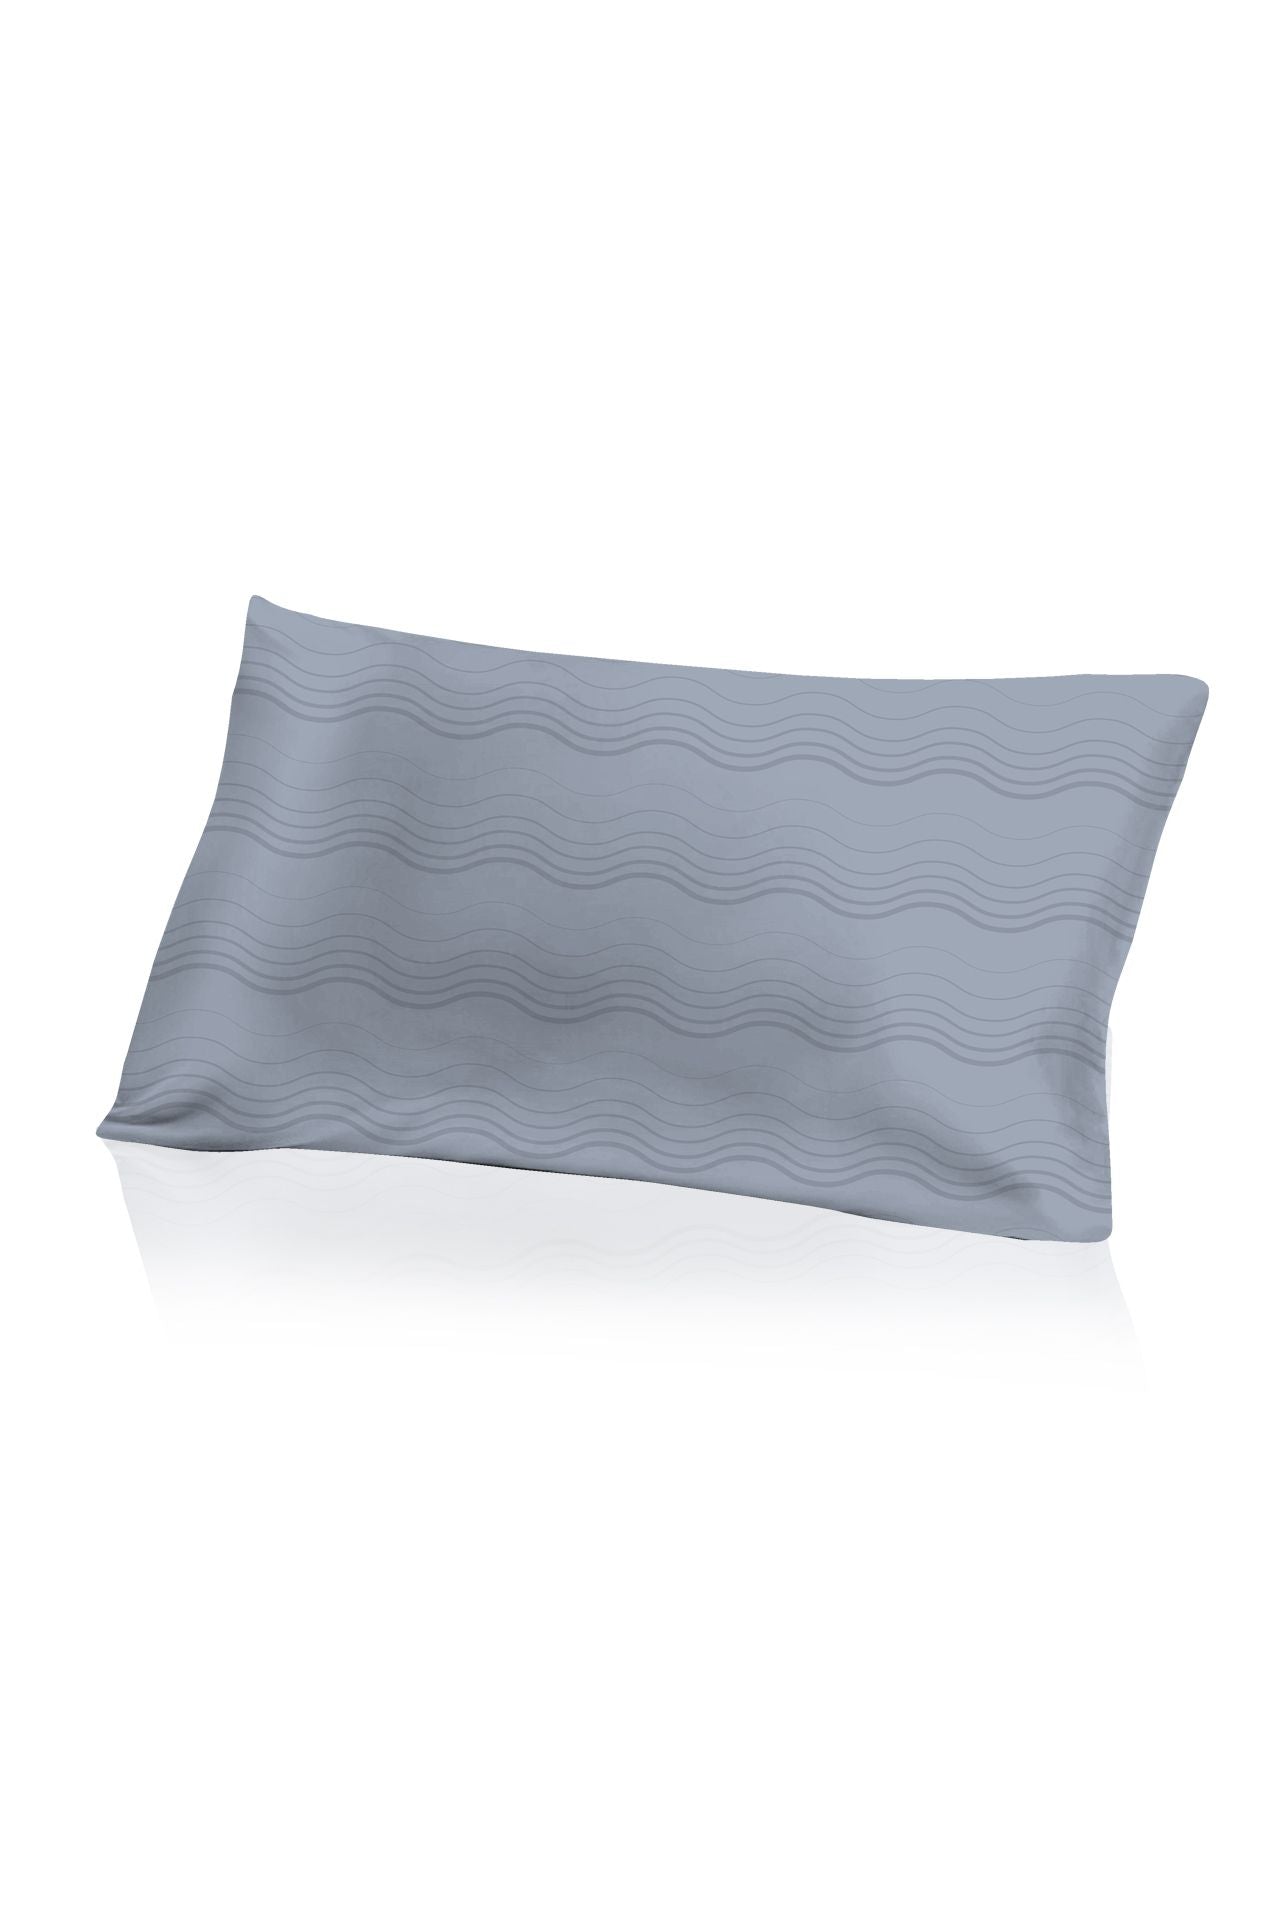 "grey and white pillow covers" "Kyle X Shahida" "designer decorative pillows" "pillows for beds decorative"